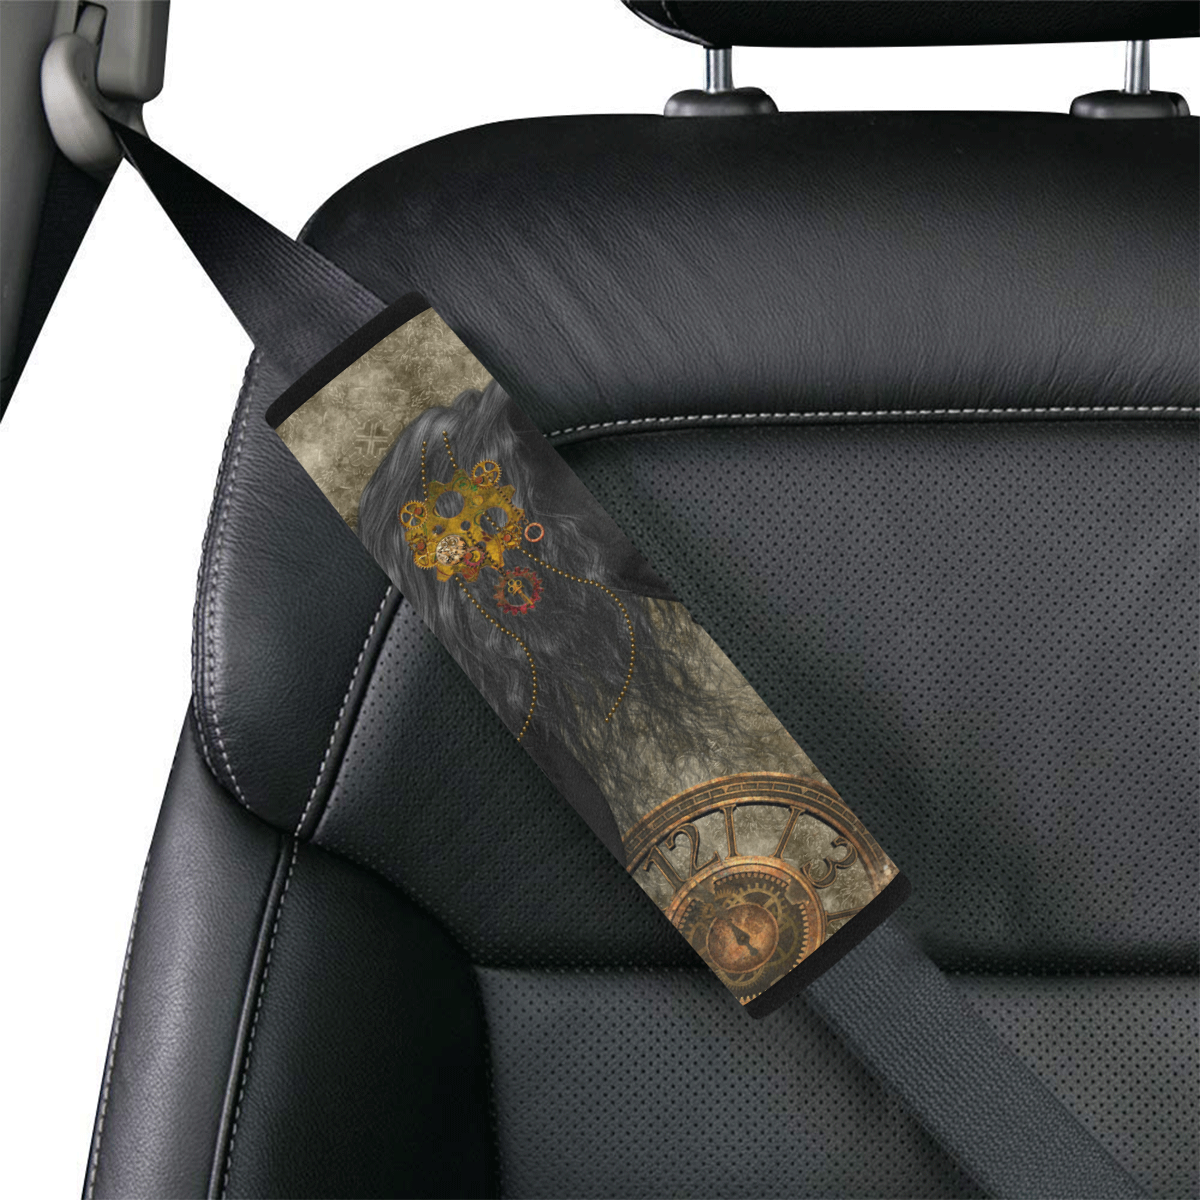 Beautiful wild horse with steampunk elements Car Seat Belt Cover 7''x10''